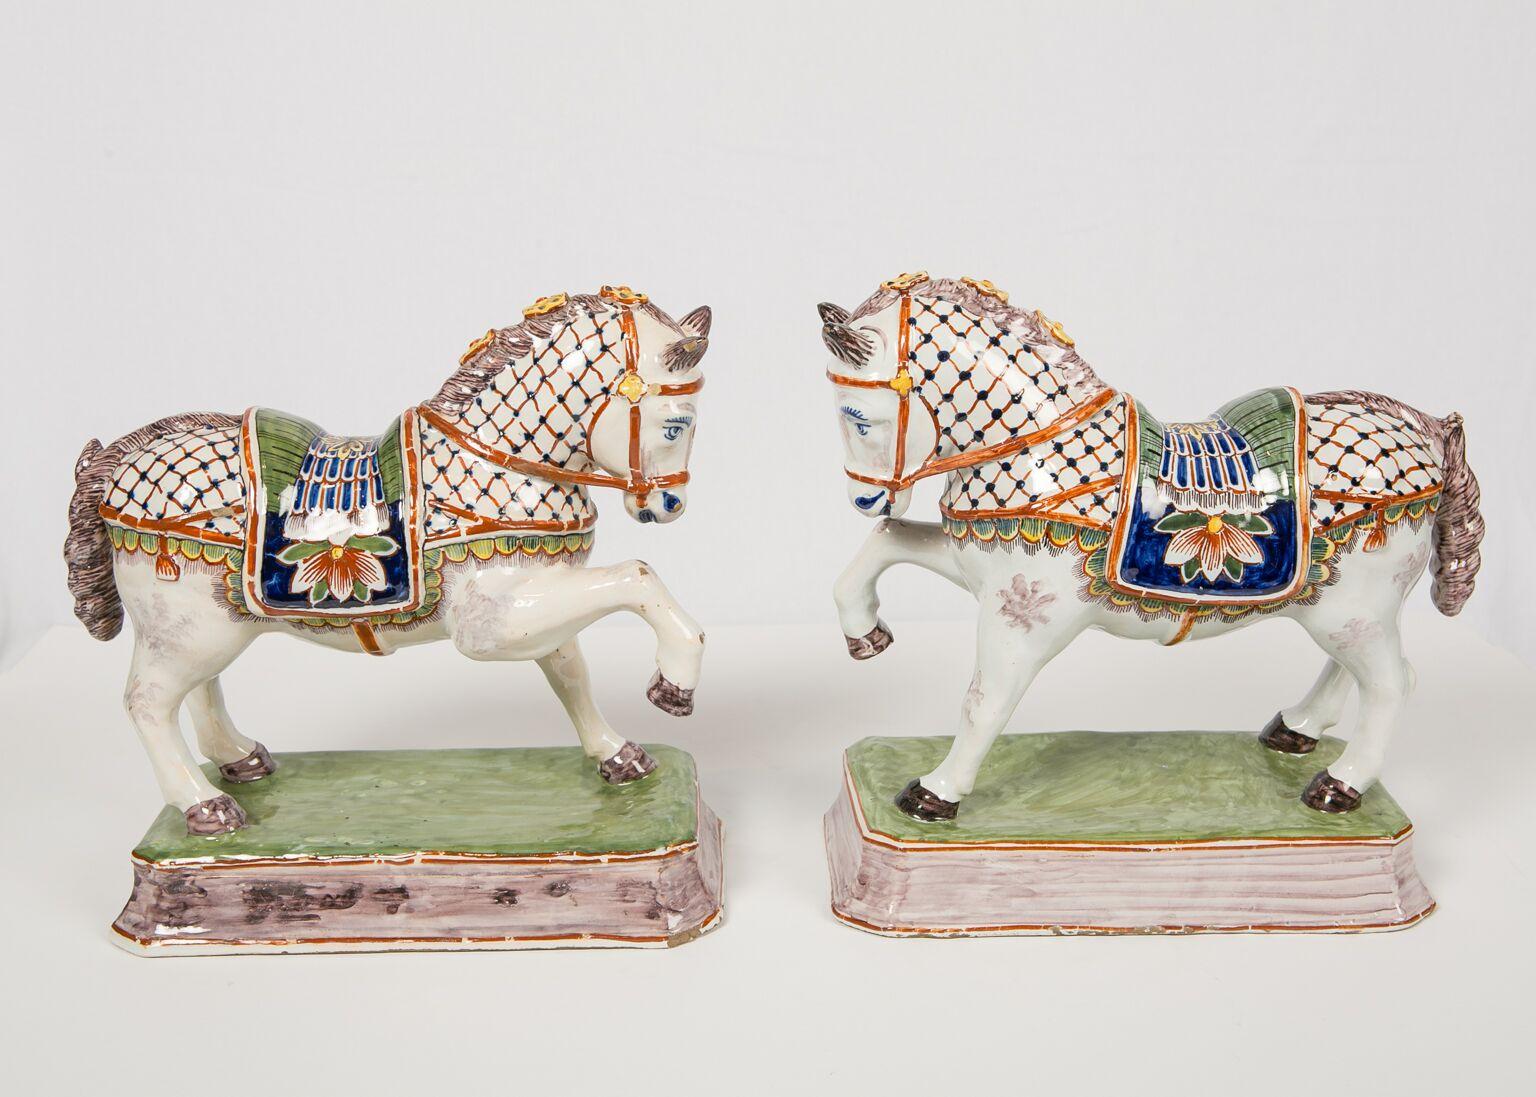 Enameled Pair of Dutch Delft Horses Painted in Polychrome Colors Made, Mid-19th Century